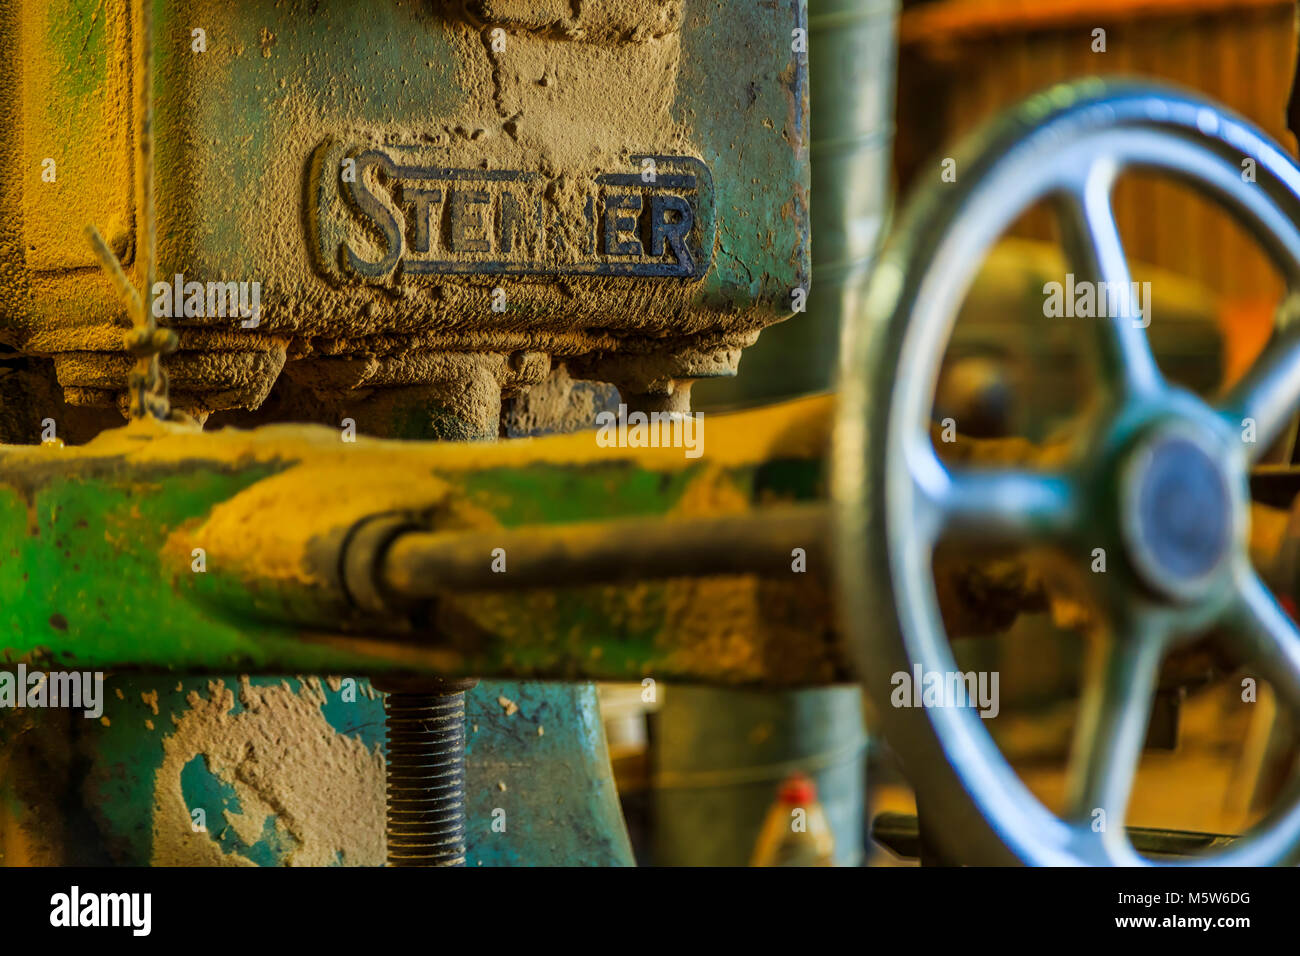 An old dusty Stenner Woodworking plant in a sawmill. Stock Photo